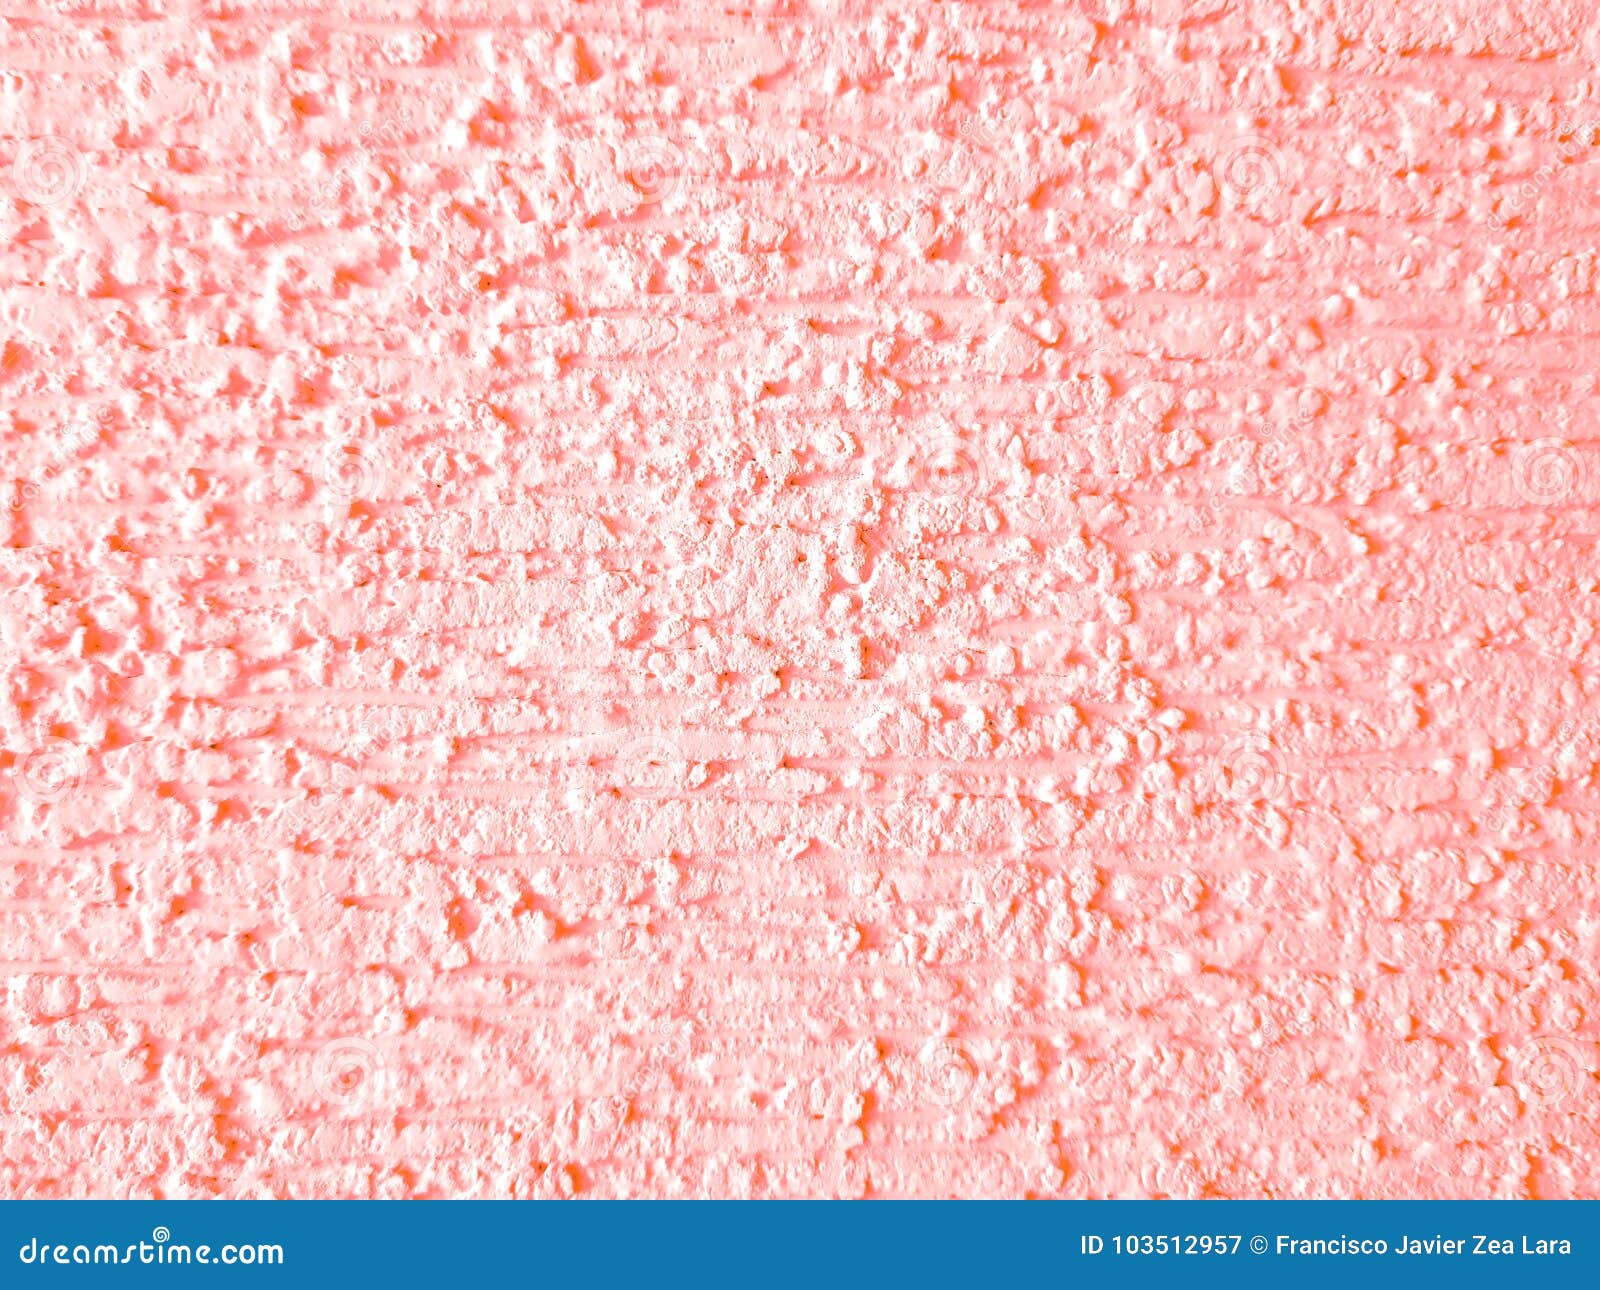 Background Texture Wall With Plaster And Paint Light Orange